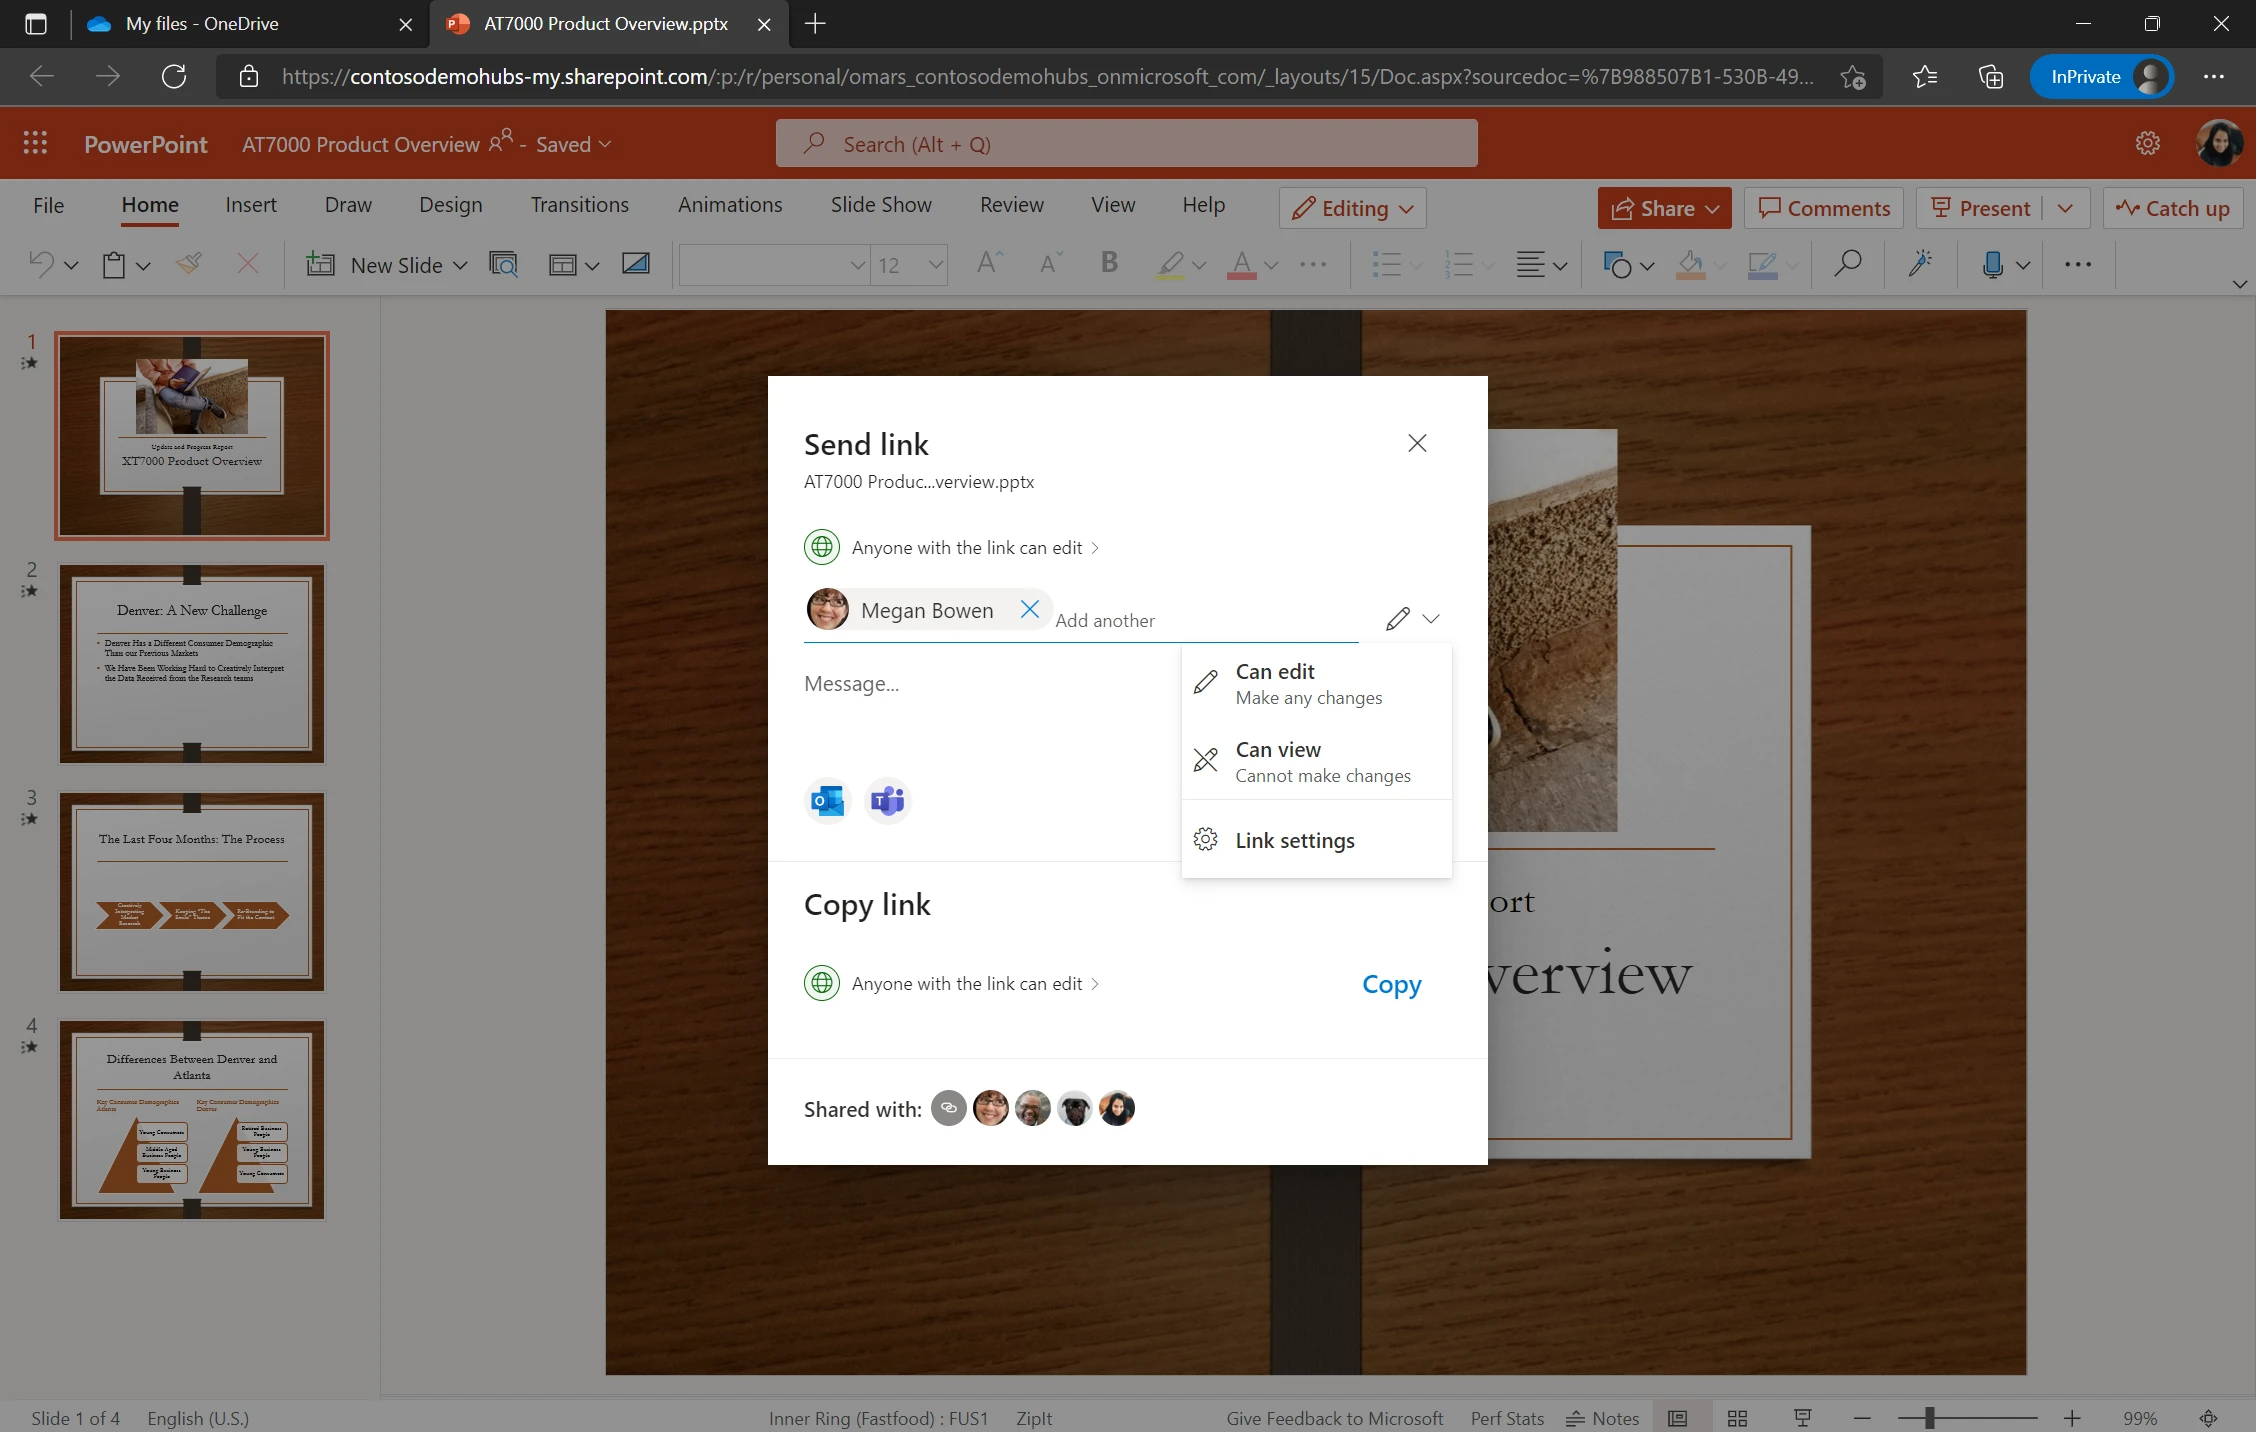 PowerPoint sharing experience consistent with that of OneDrive.